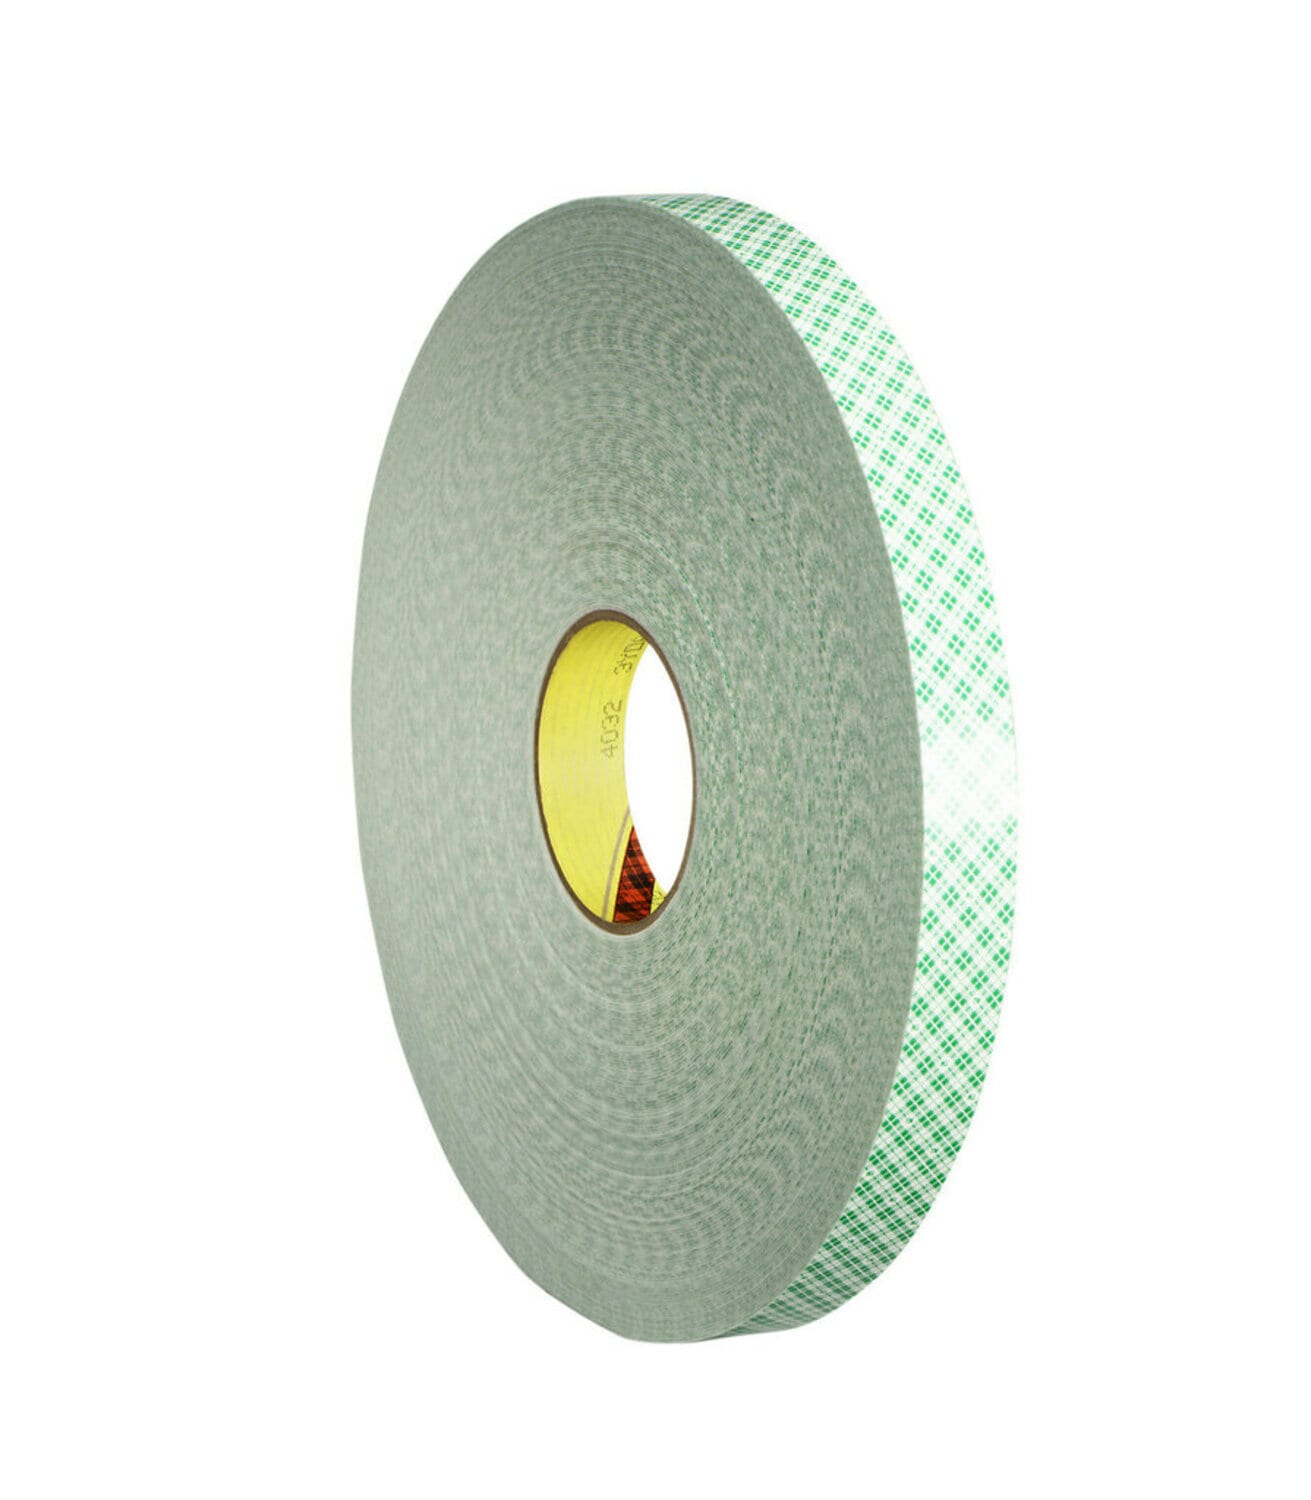 7000028664 - 3M Double Coated Urethane Foam Tape 4032, Off White, 3/8 in x 72 yd, 31
mil, 24 Rolls/Case